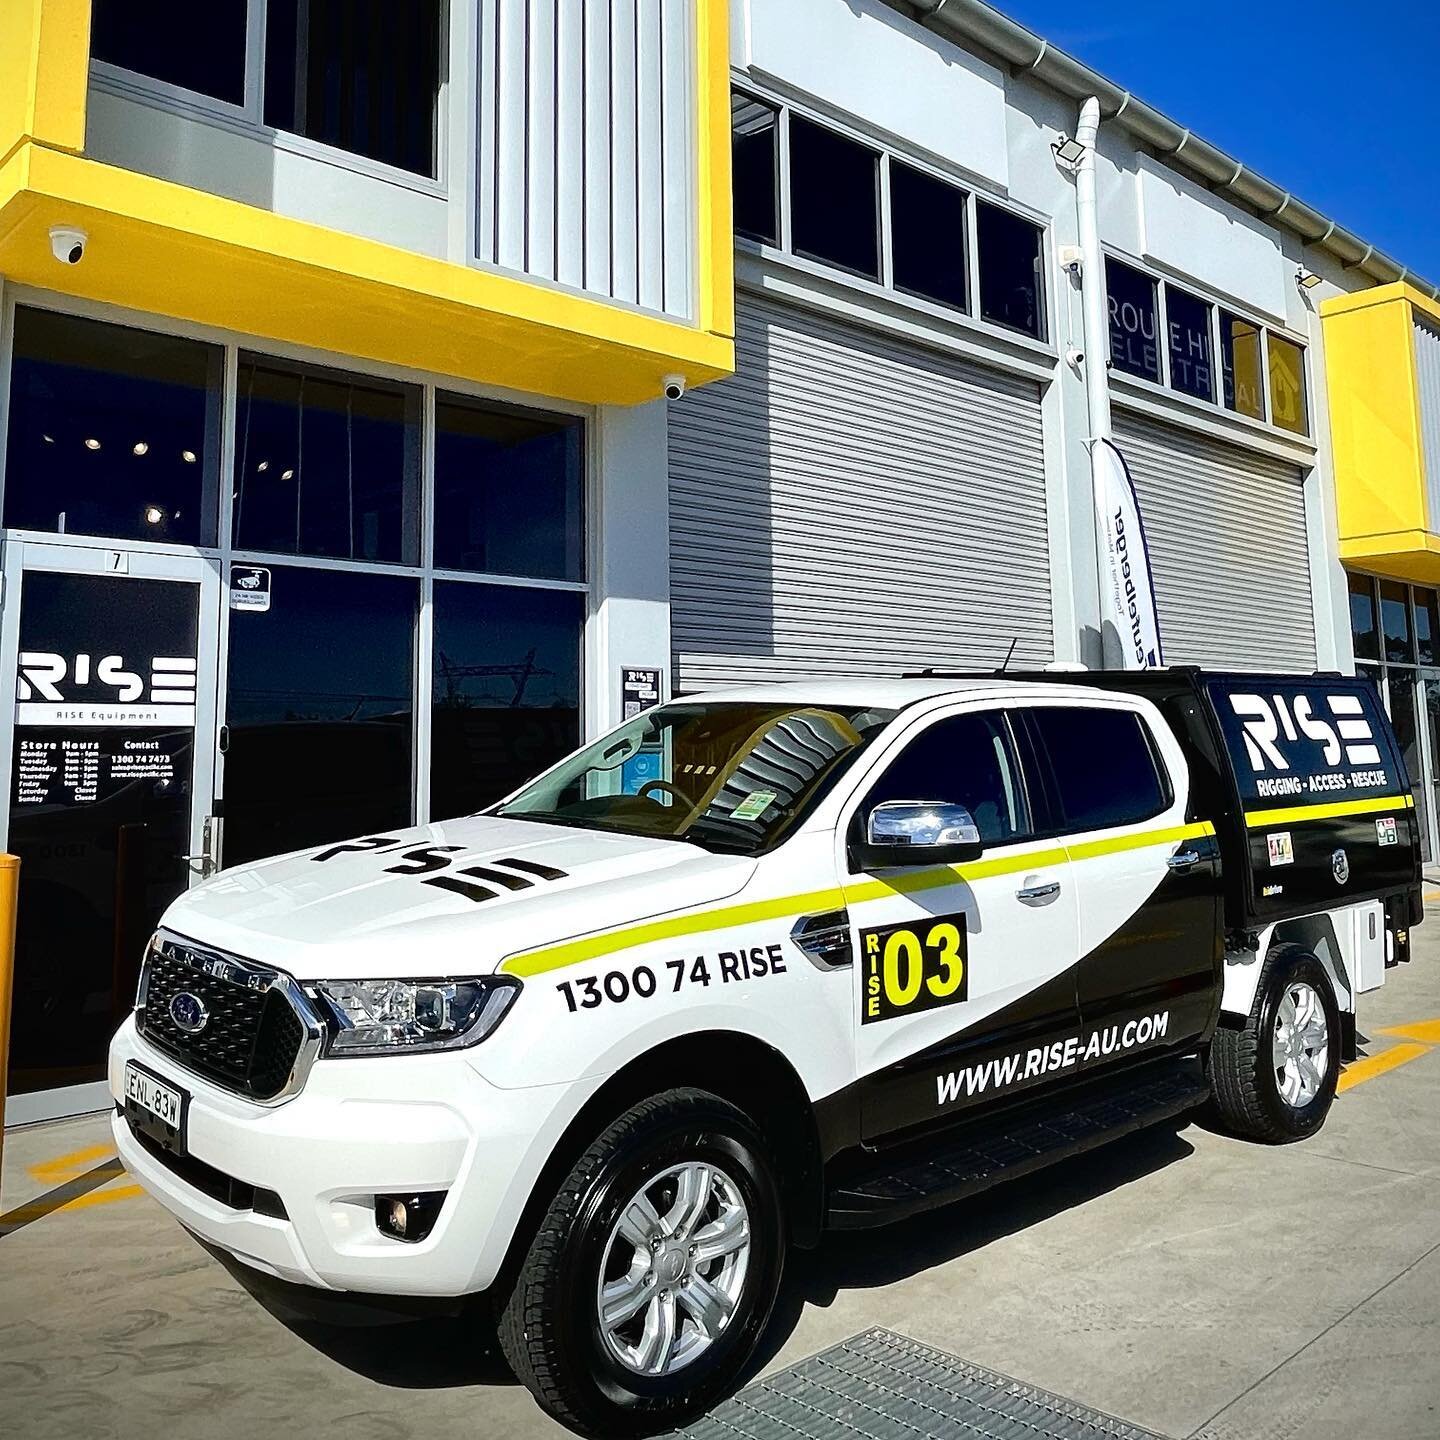 Welcoming RISE 03 to the family! Thanks @hidrivegroup for the slick canopy build on our new @fordaustralia Ranger. 

This vehicle will increase our capability reaching remote essential infrastructure for maintenance and upgrade works.

#ranger #fordr